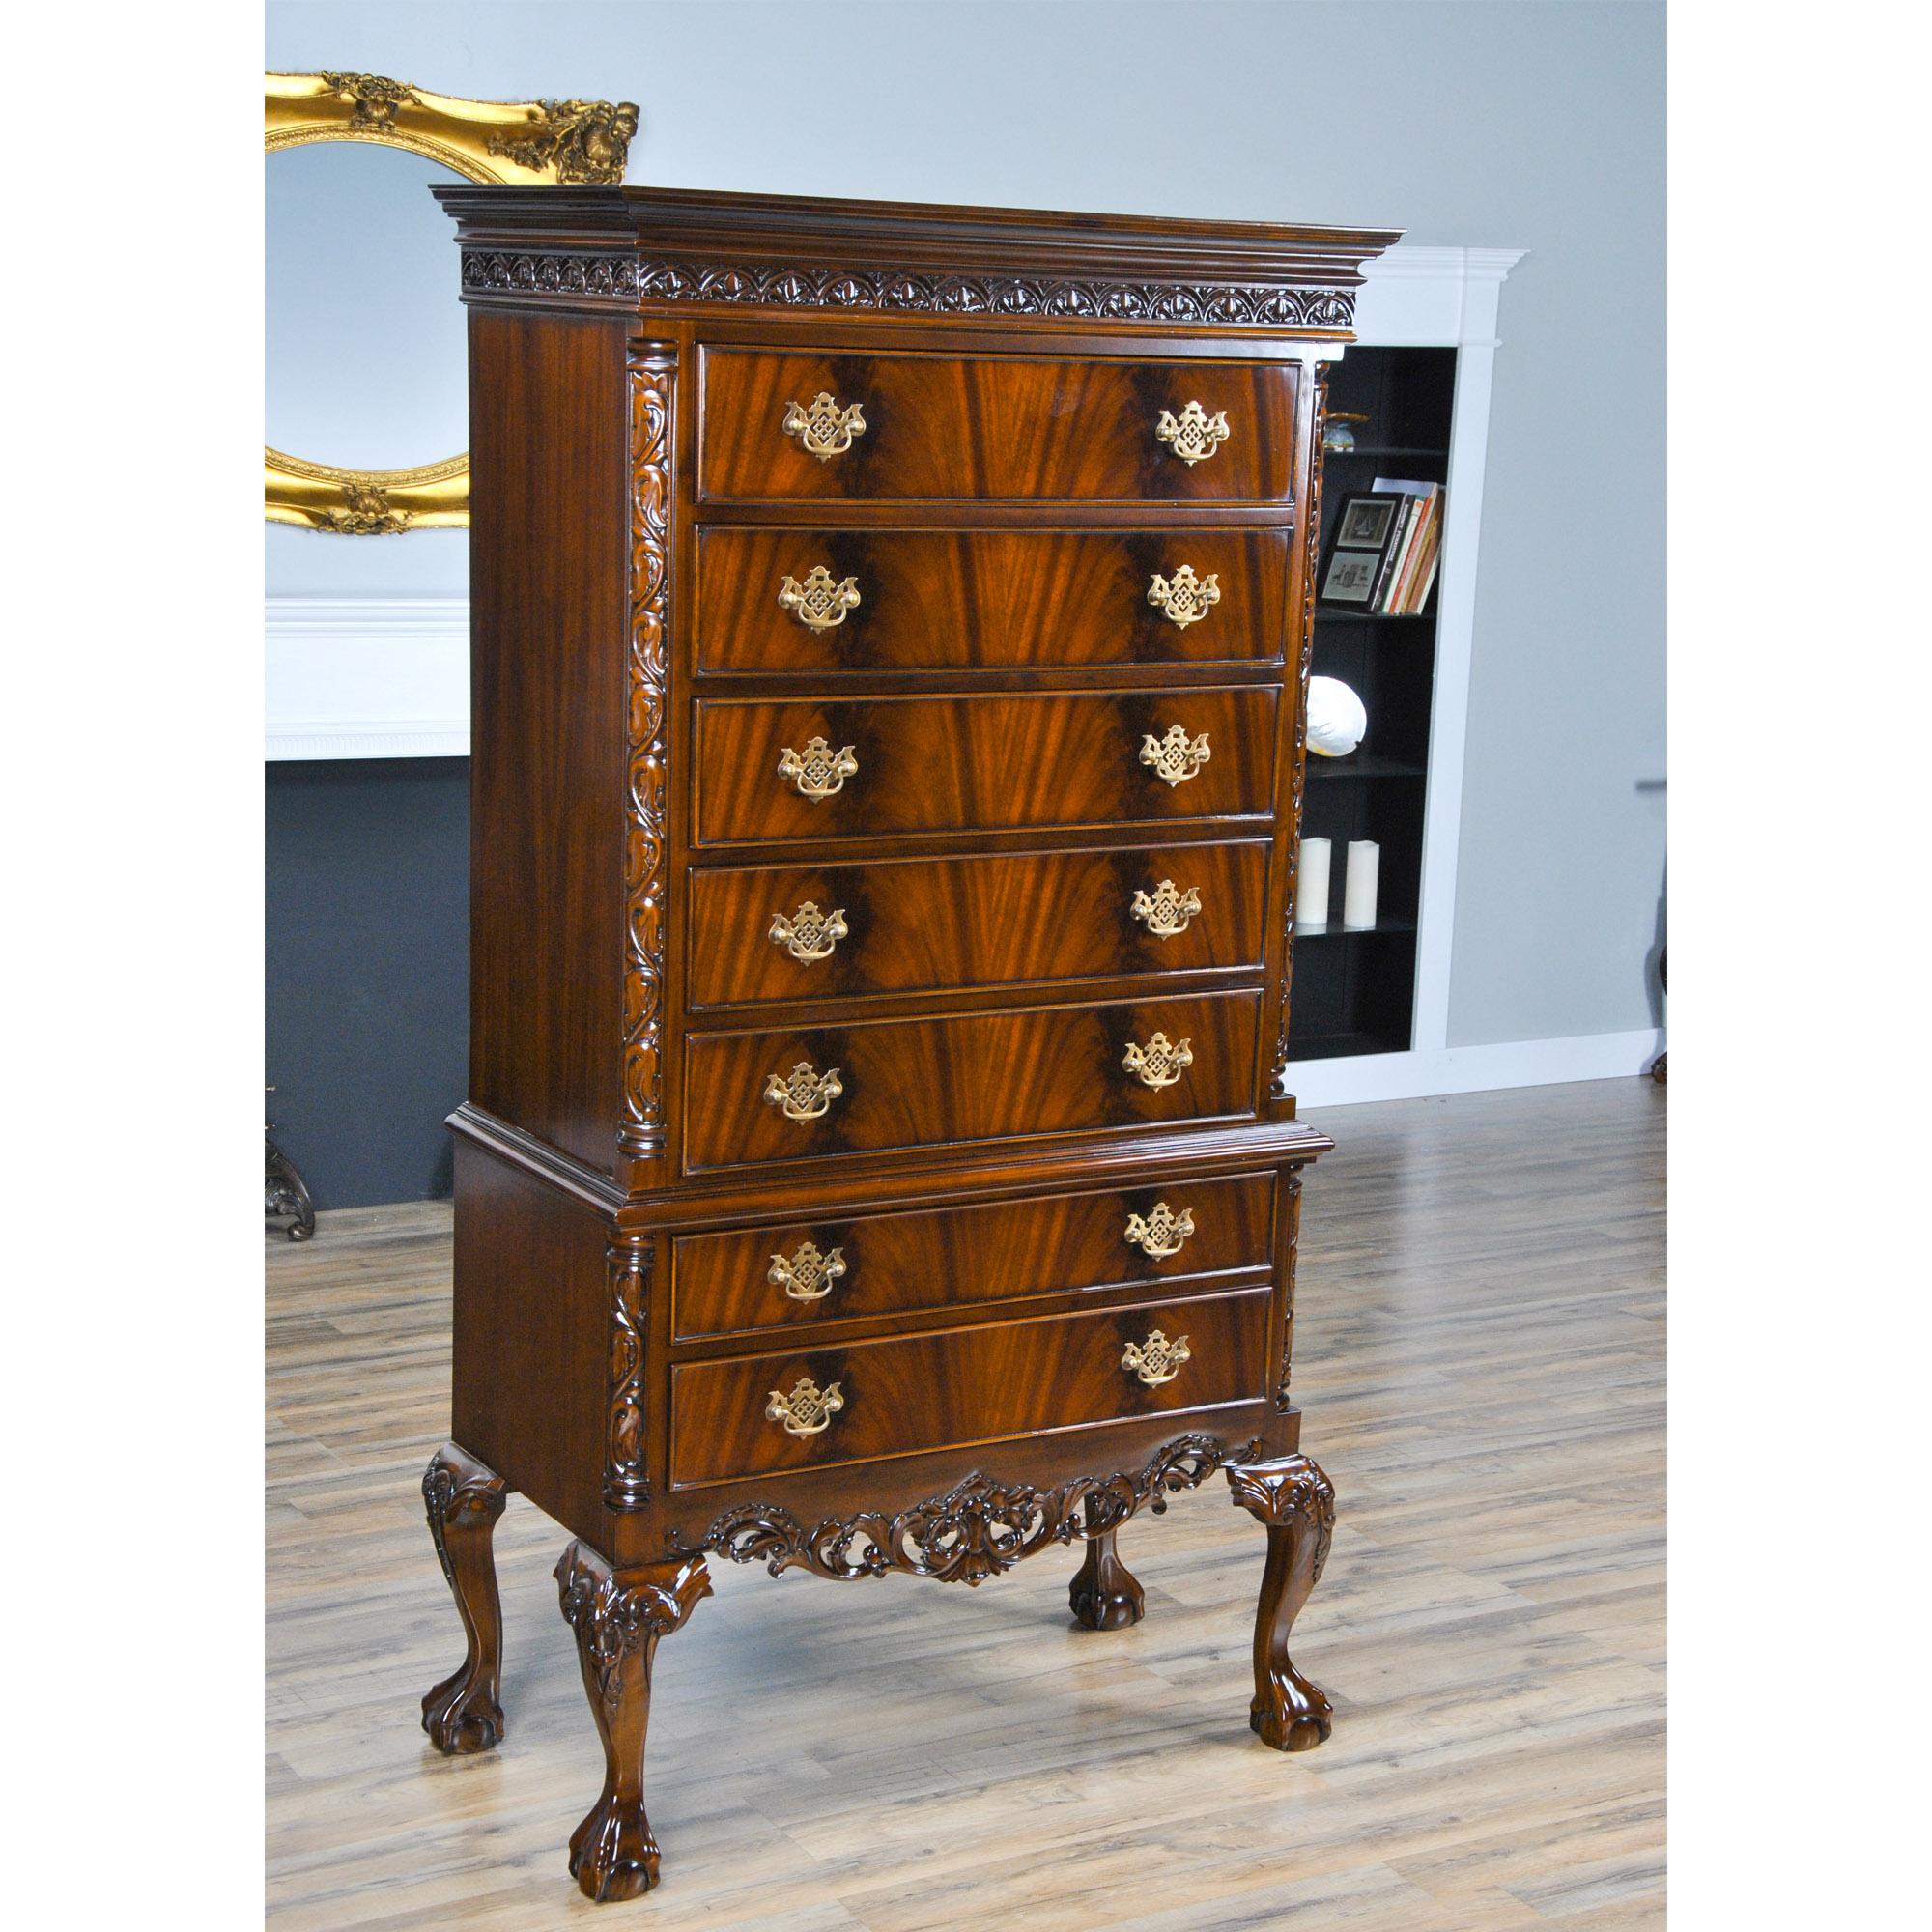 This Chippendale Mahogany High Chest will be the focal point of any room. Originally designed for the bedroom the practical storage space provided by this chest would be welcome anywhere in the home. Two part construction makes for easy handling and